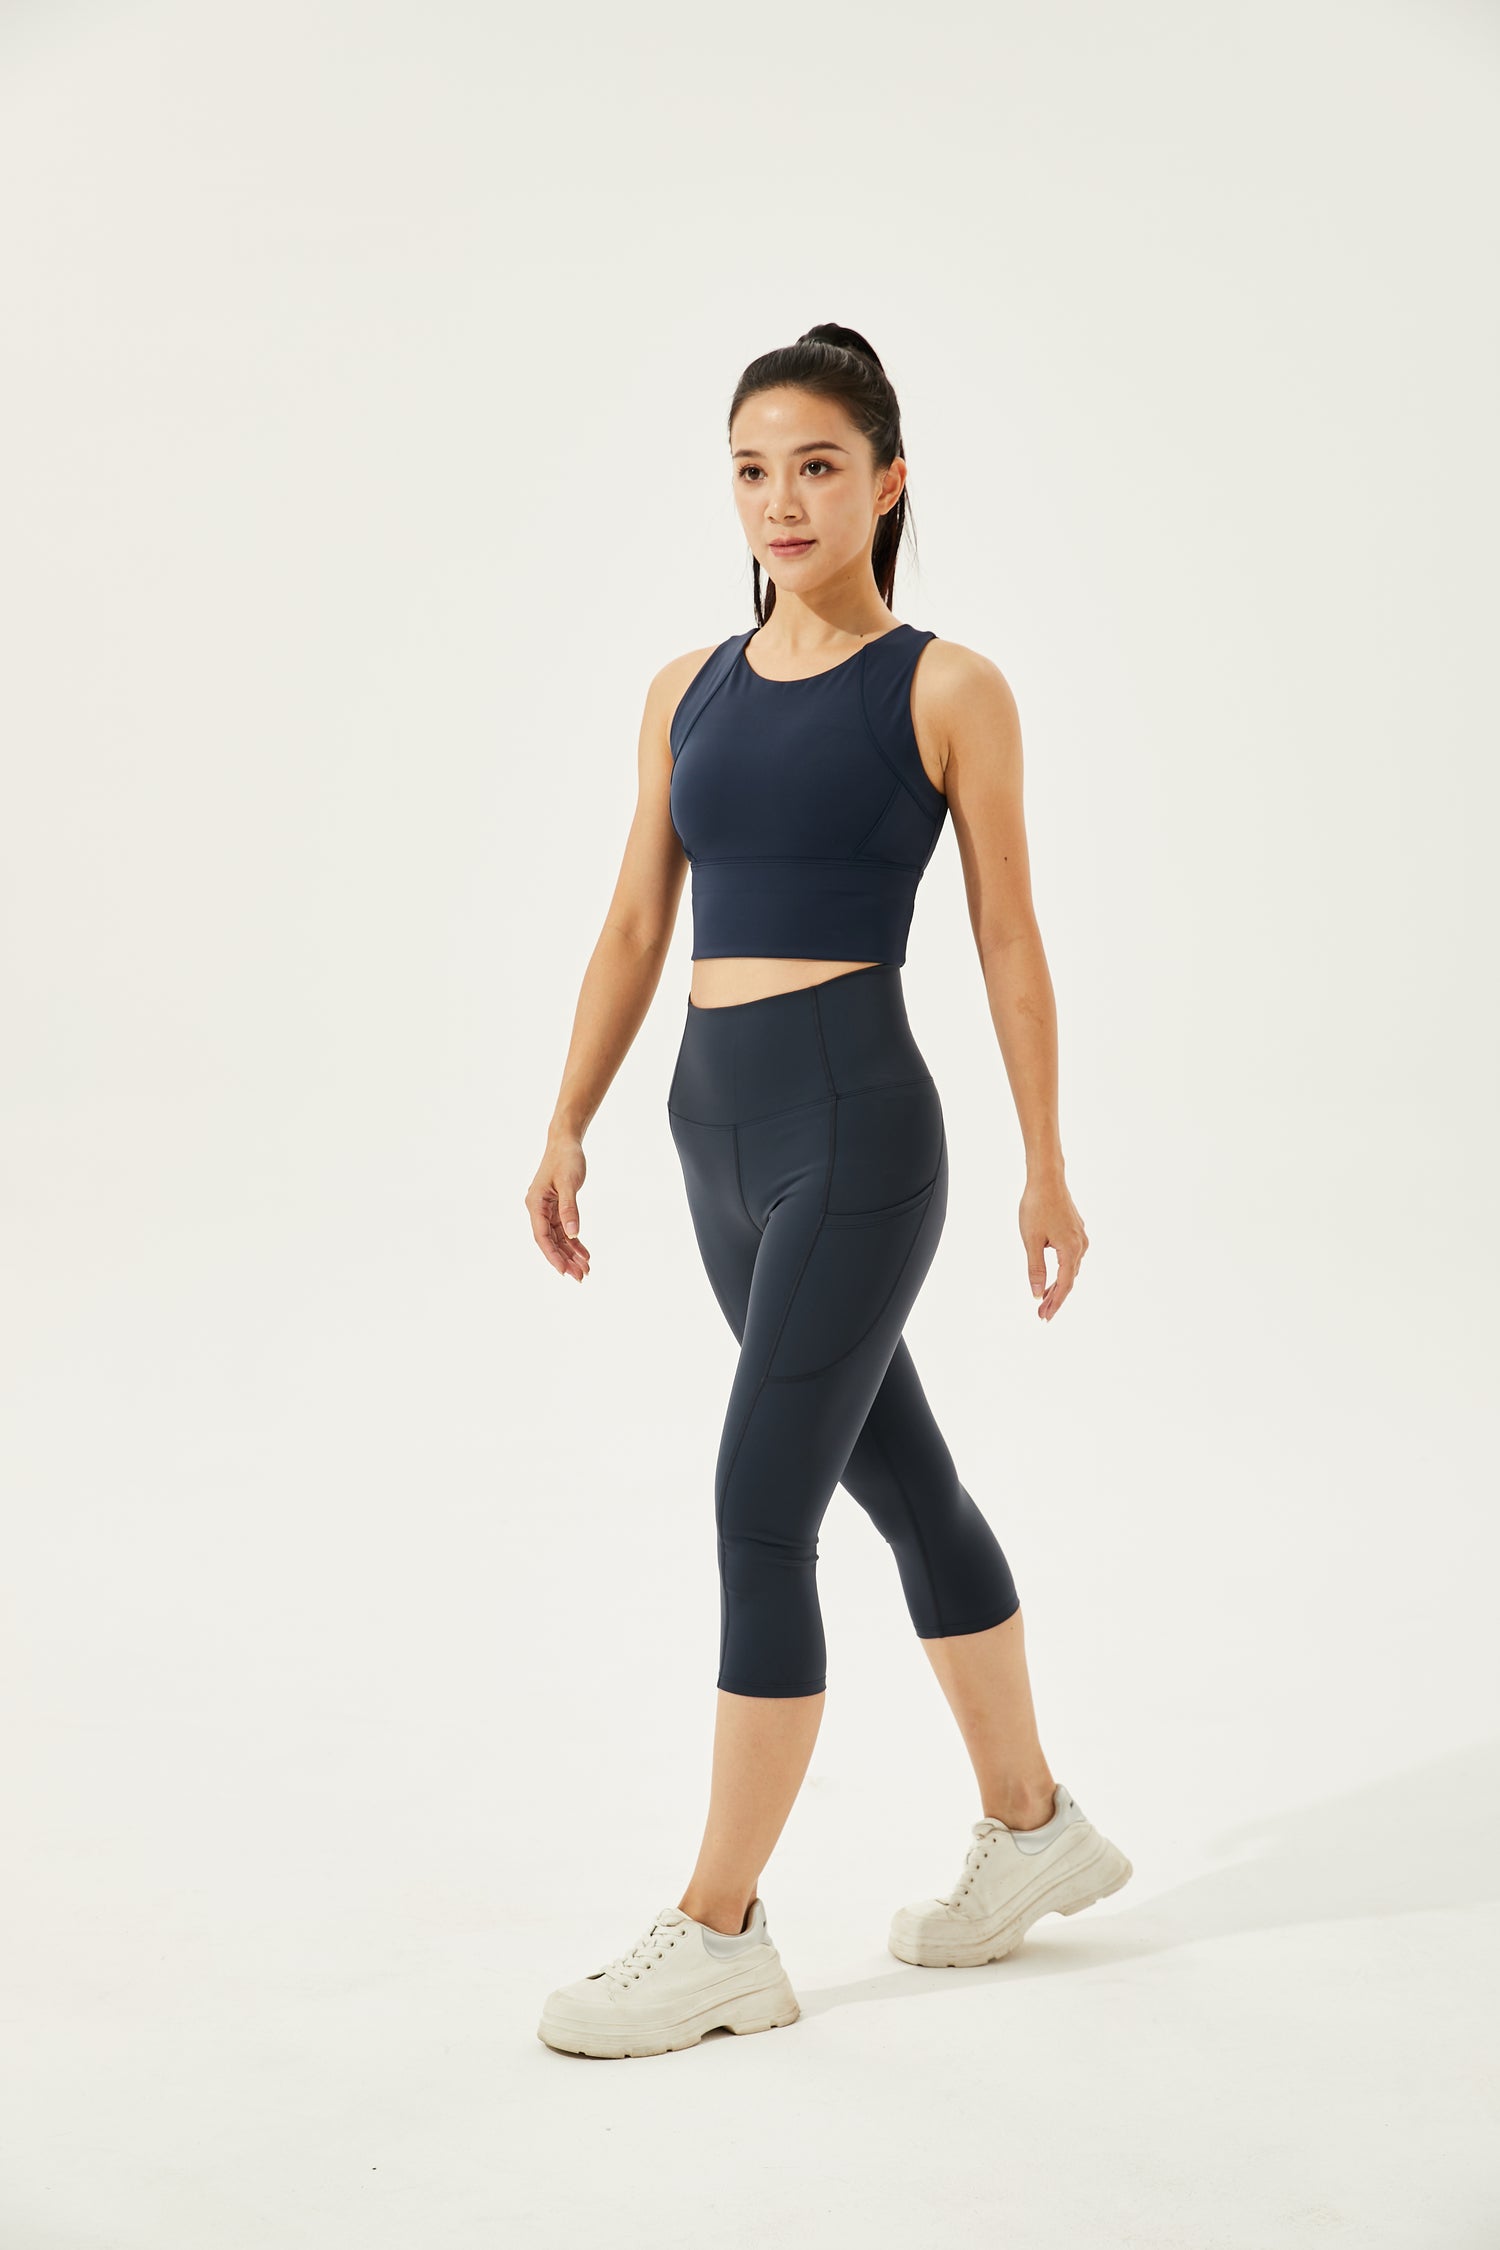 High-Waist 7/8 Buttery Soft & Cooling Camel-Toe Proof Courage Leggings